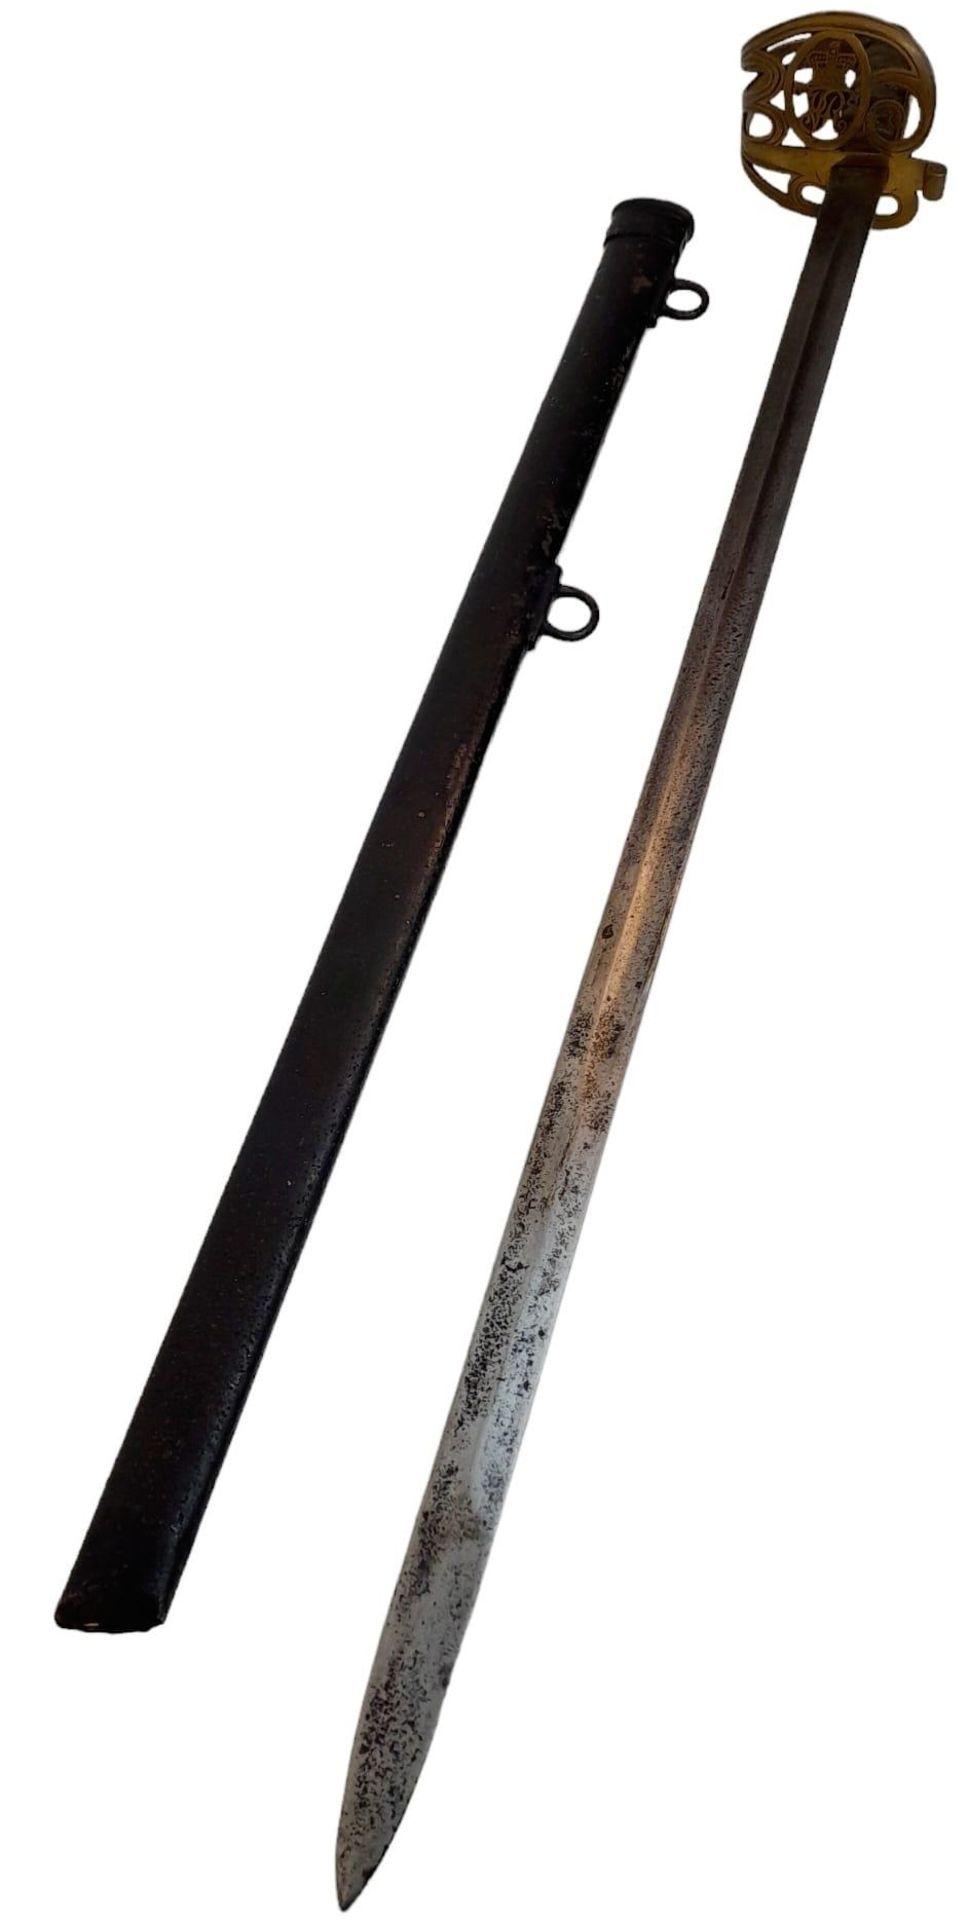 An 1890 Pattern Cavalry Sword - Date issued 1903. Crown inspector with initials underneath. Scabbard - Image 7 of 7